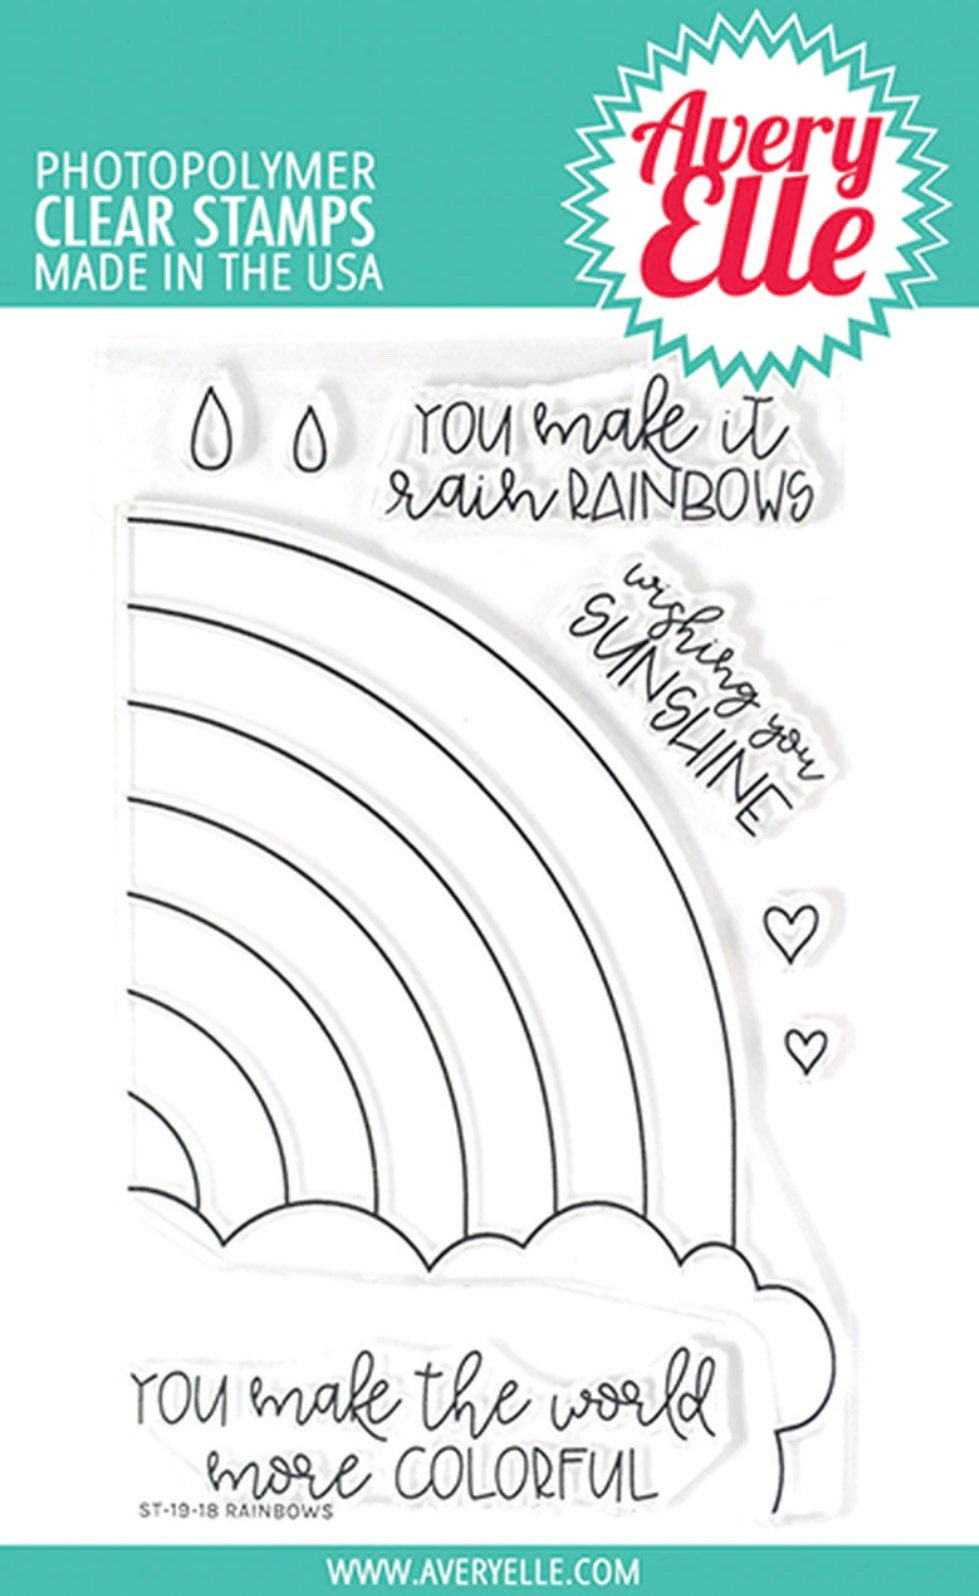 Avery Elle Clear Photopolymer Rubber Stamp Set - Rainbows